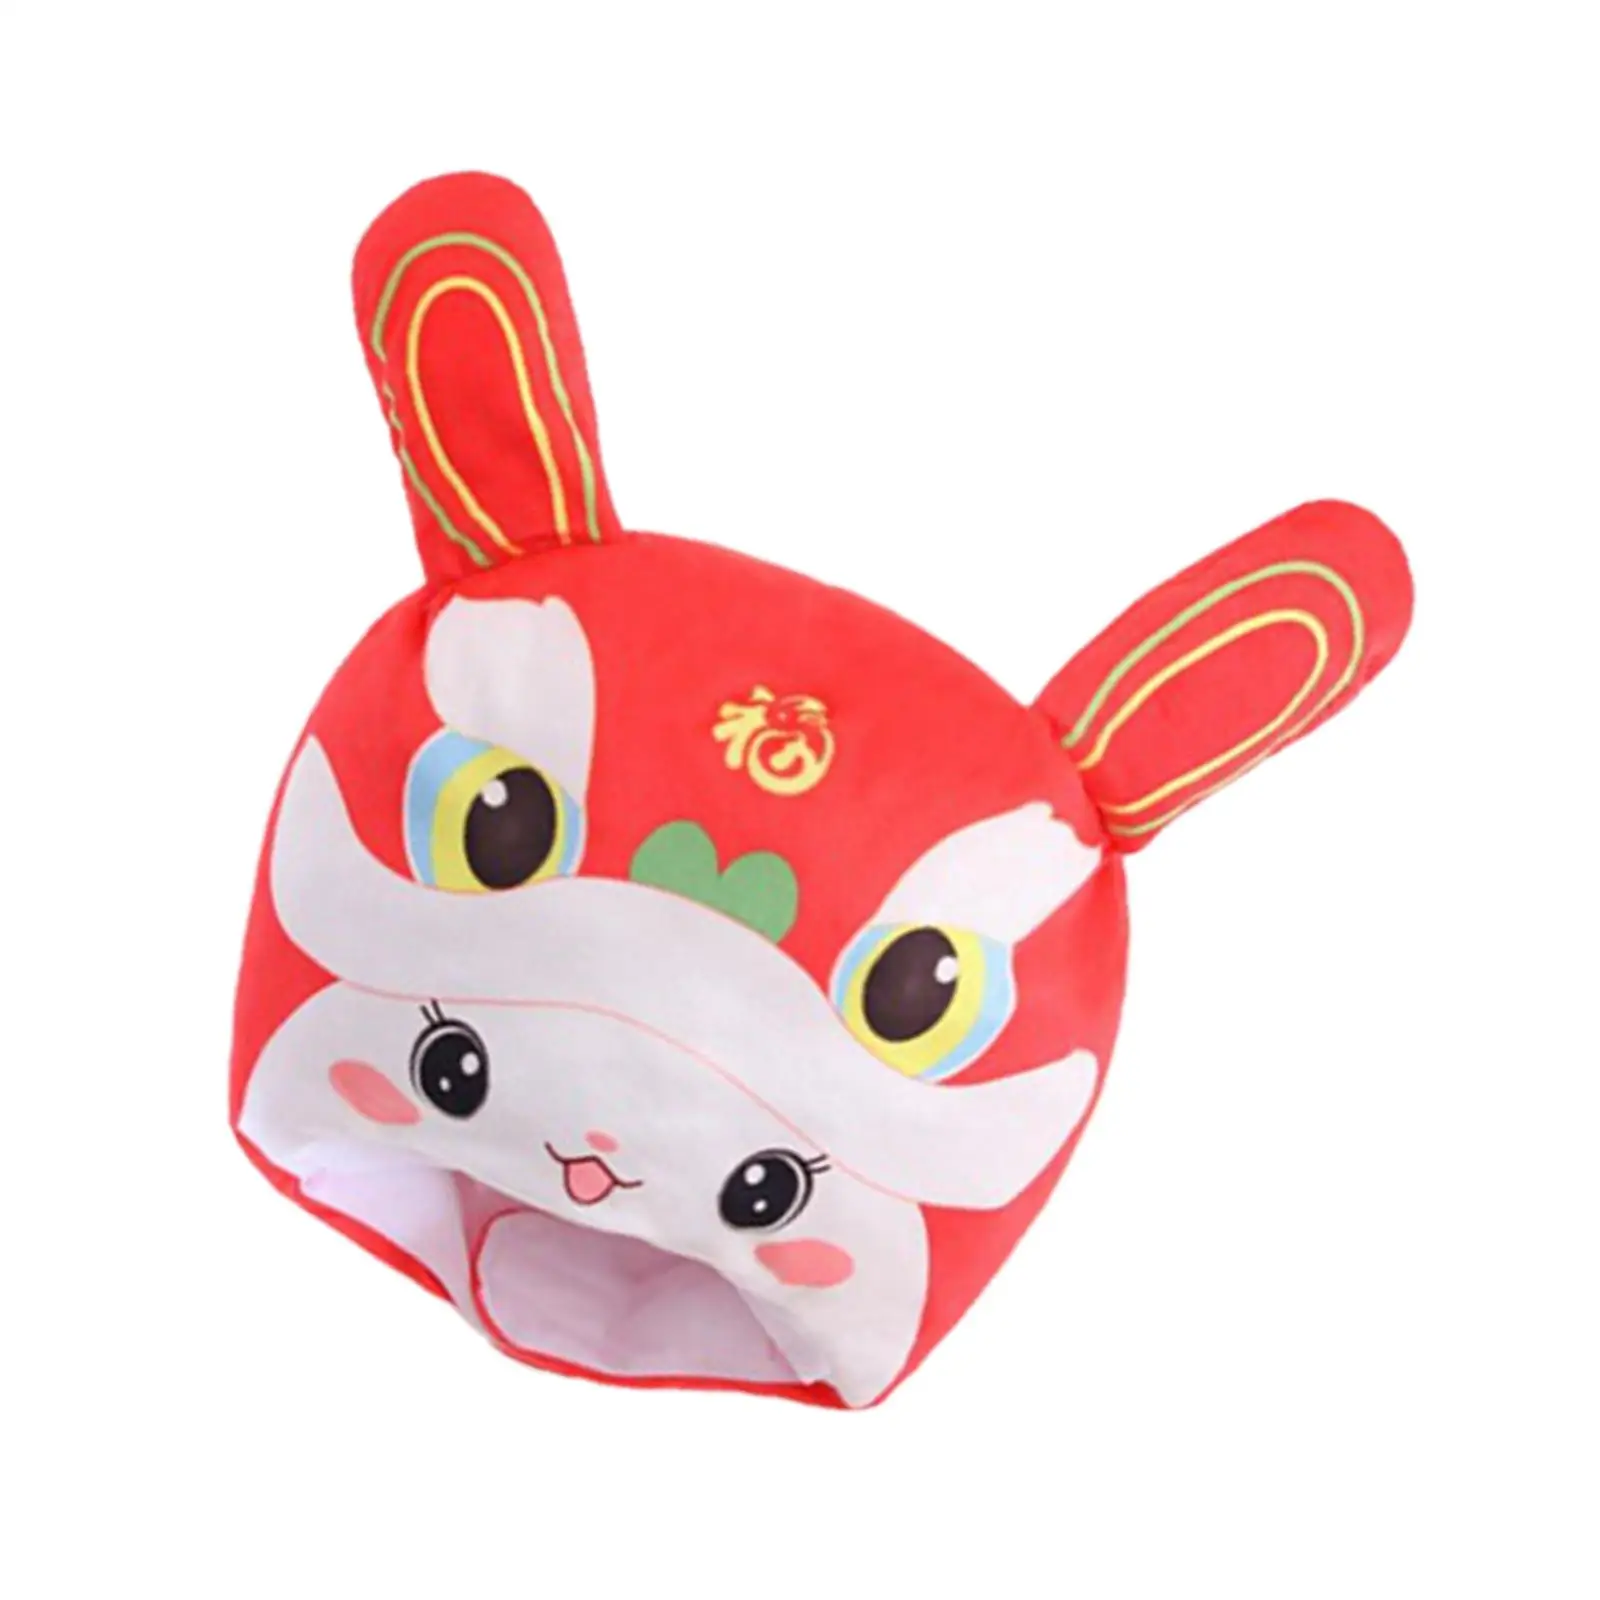 Lion Rabbit Plush Hat Holiday Decorations Headgear Animal Hat Unisex Winter Creative for Party Cosplay Costume New Year